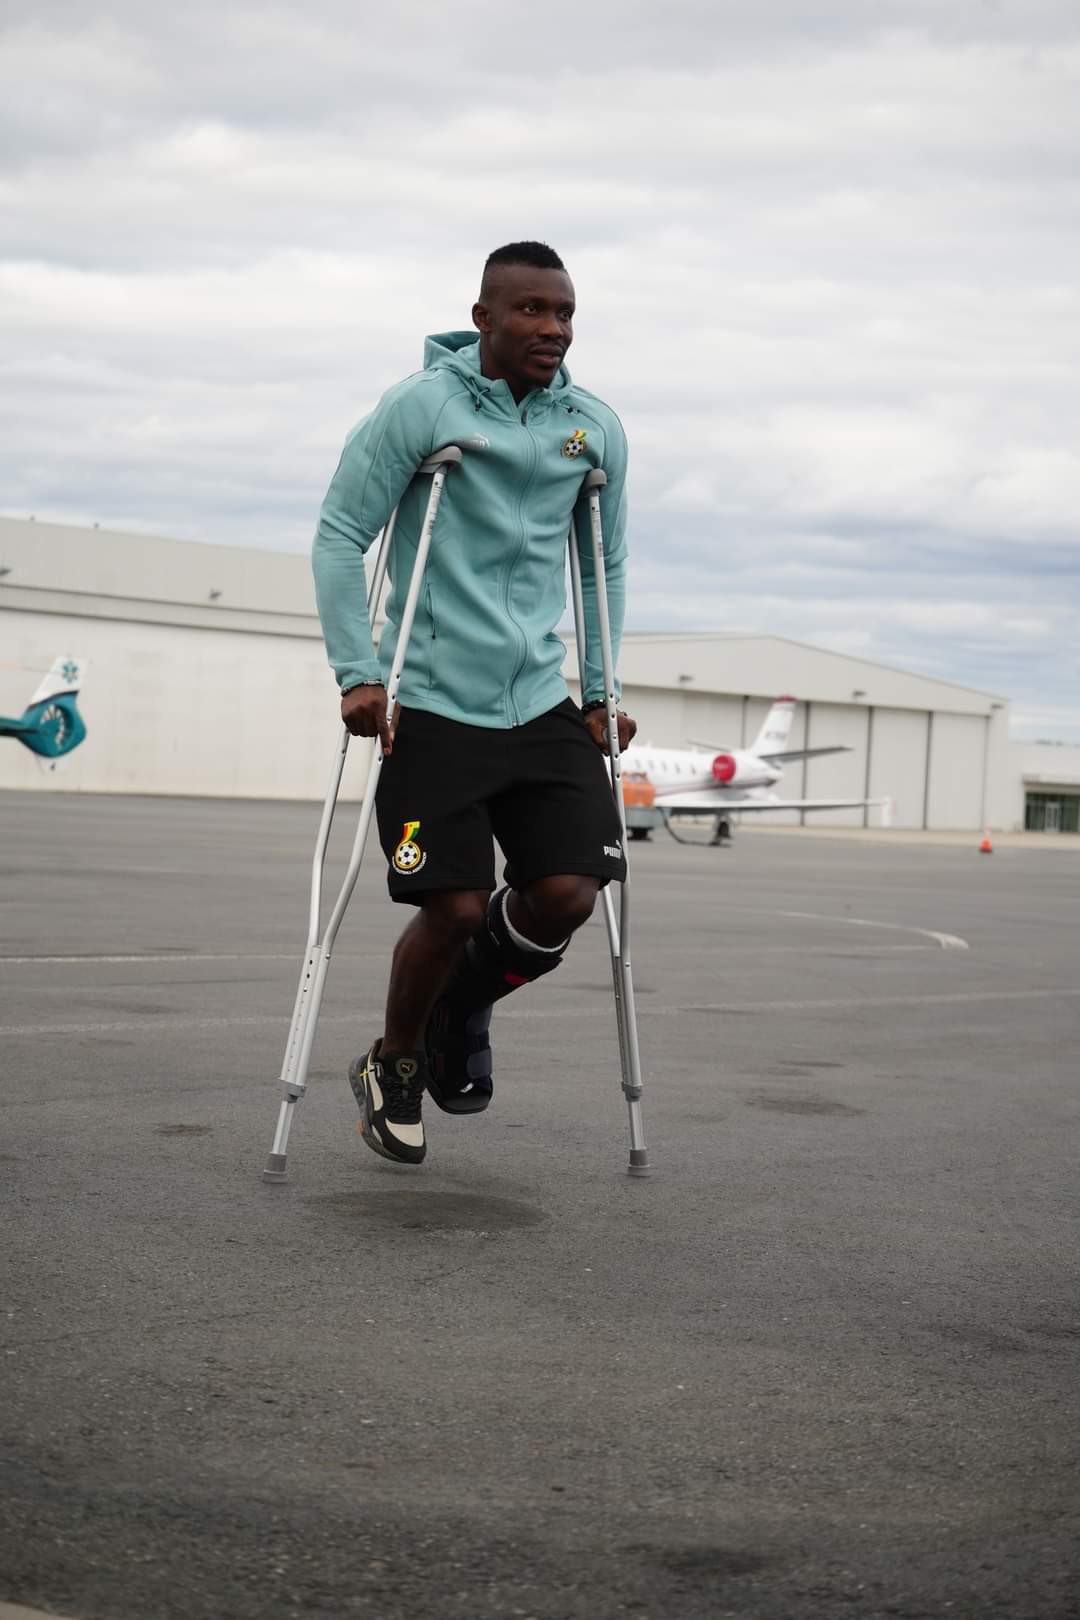 Ghana defender Joseph Aidoo ruled out of USA clash due to ankle injury